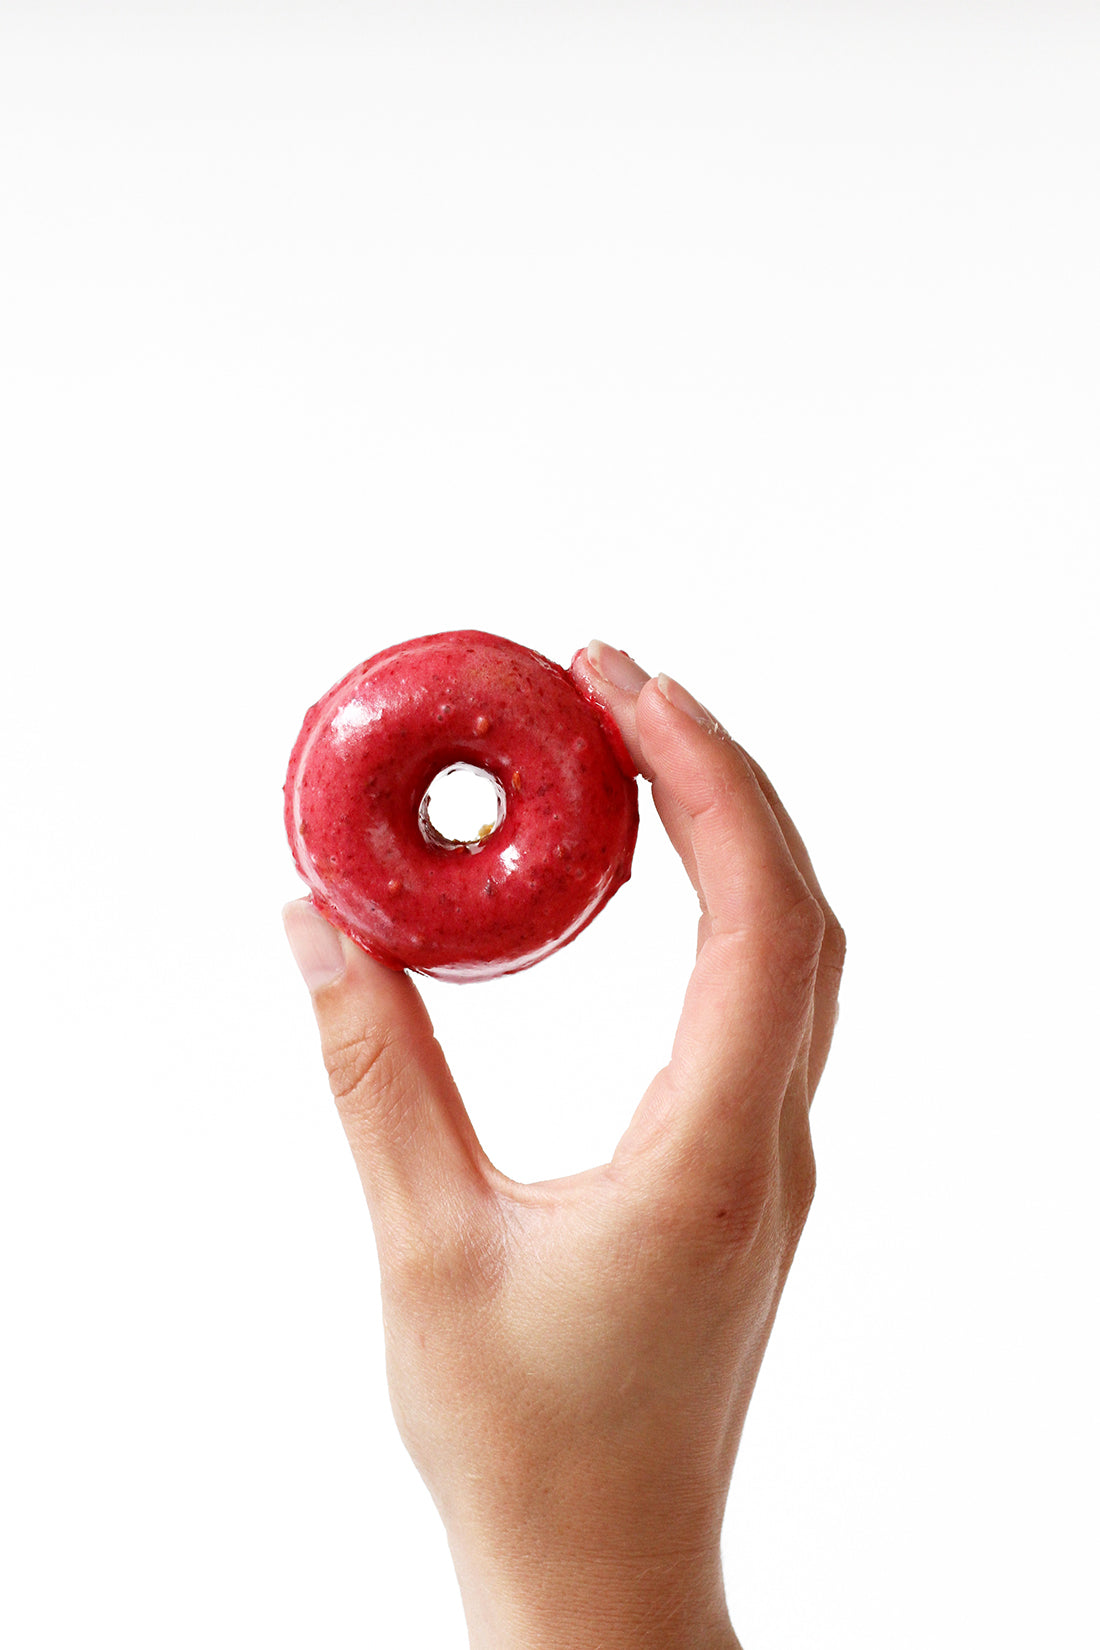 Image of a hand holding up one finished Miss Jones Baking Co Blackberry Buttermilk Donut